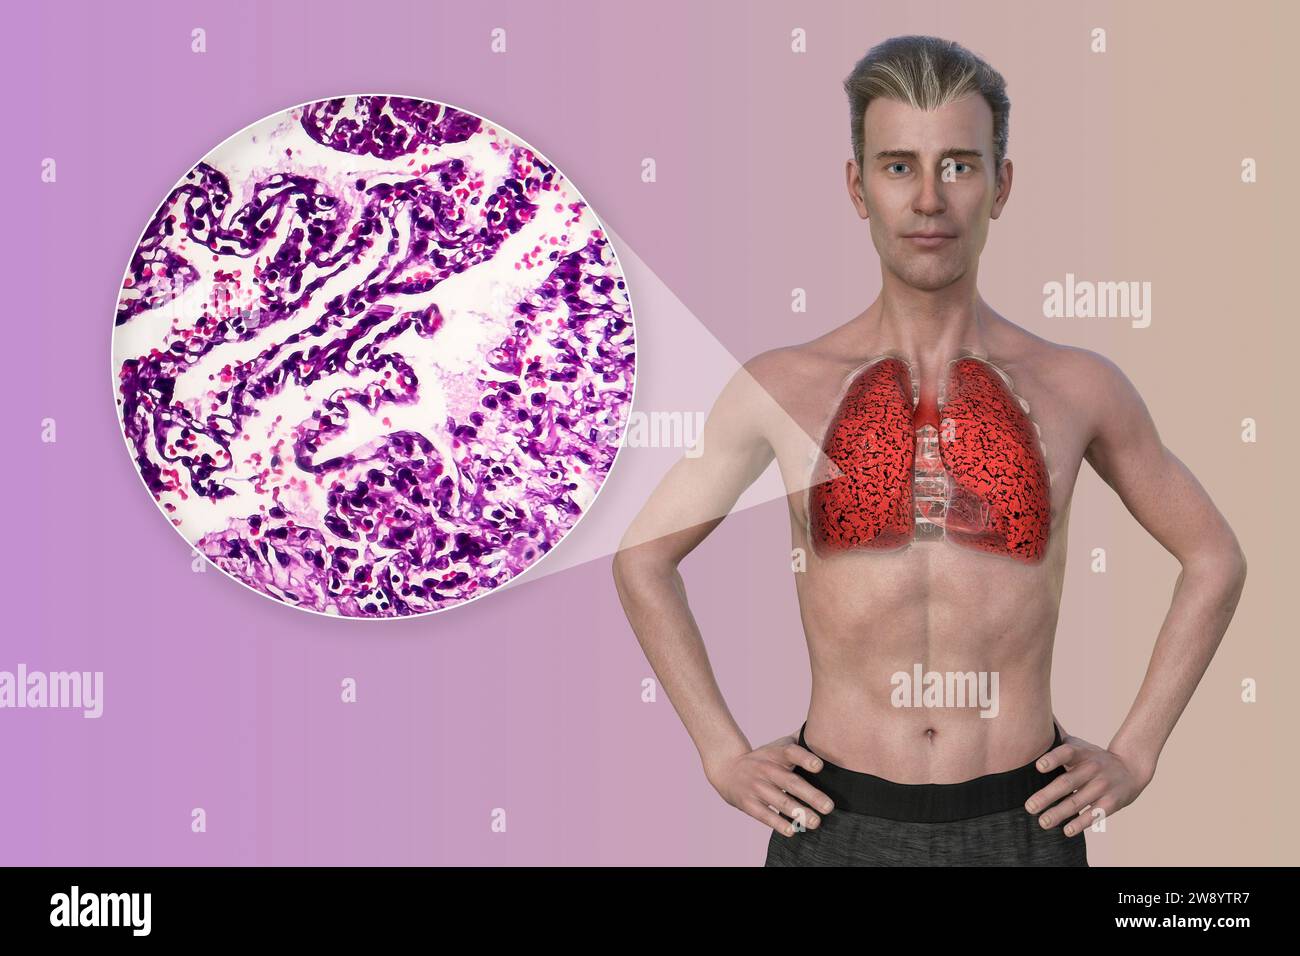 Man with smoker's lungs, illustration Stock Photo